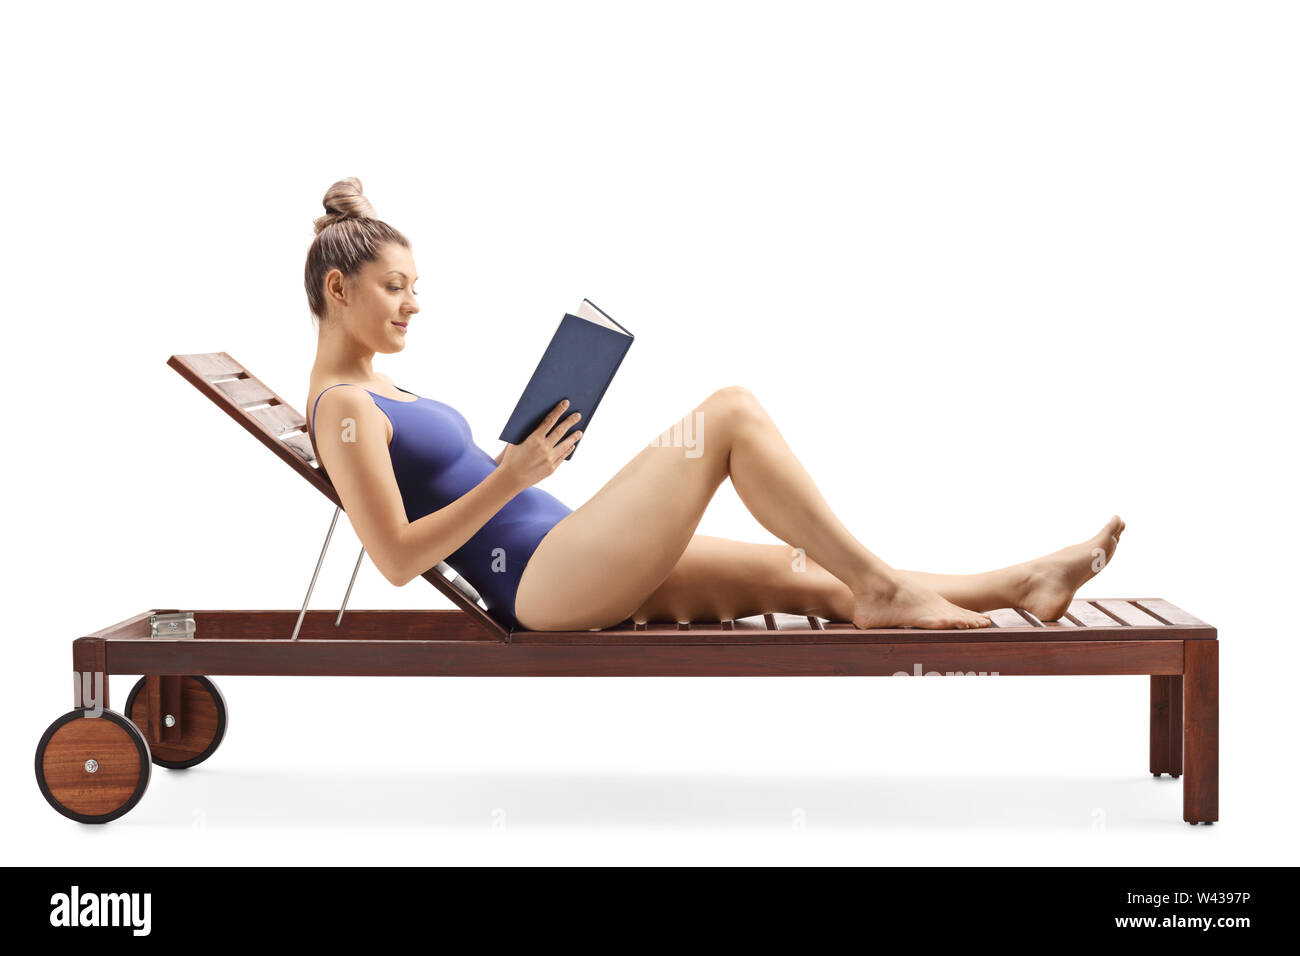 Full length shot of a young woman reading a book and relaxing on a sunbed isolated on white background Stock Photo